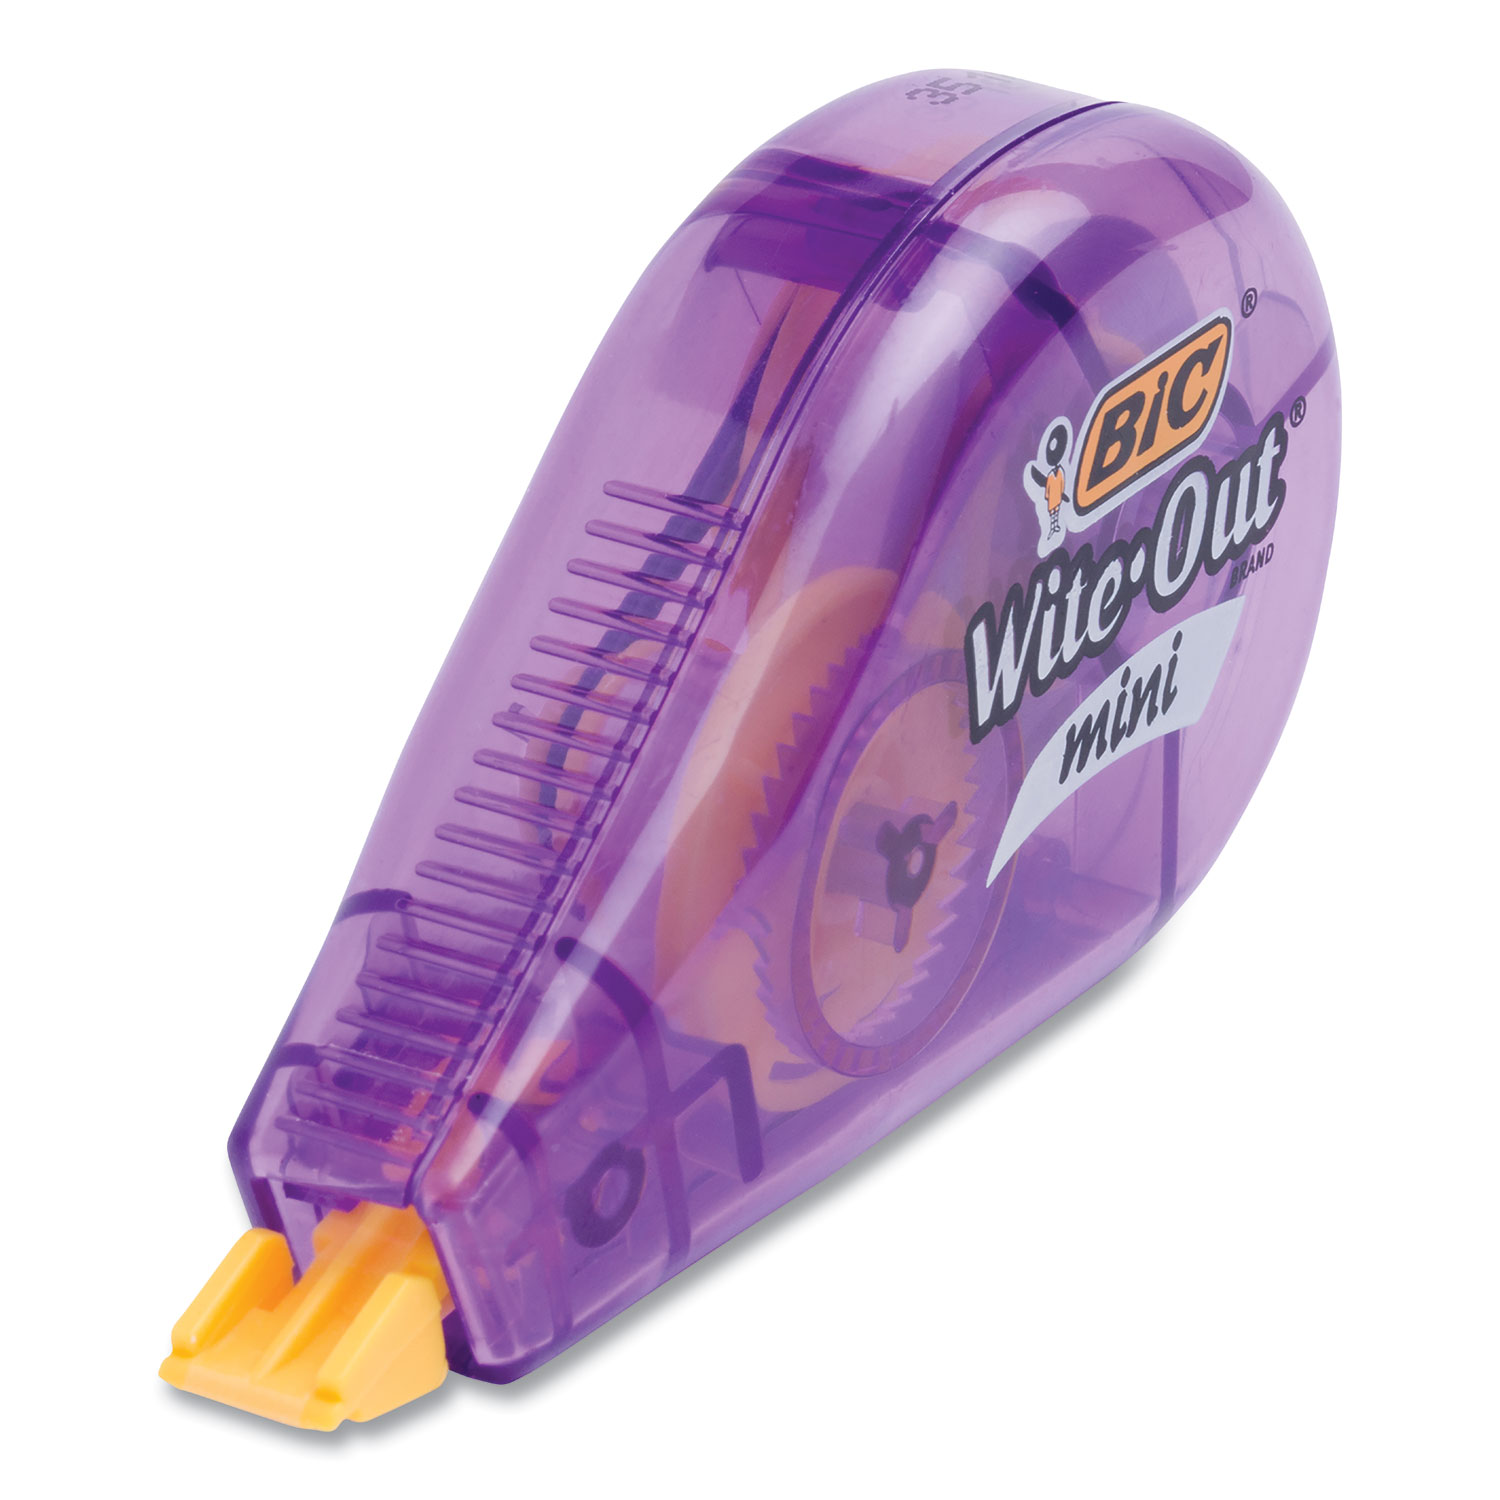 BIC Wite-Out Brand Mini Twist Correction Tape, White, 2 Count